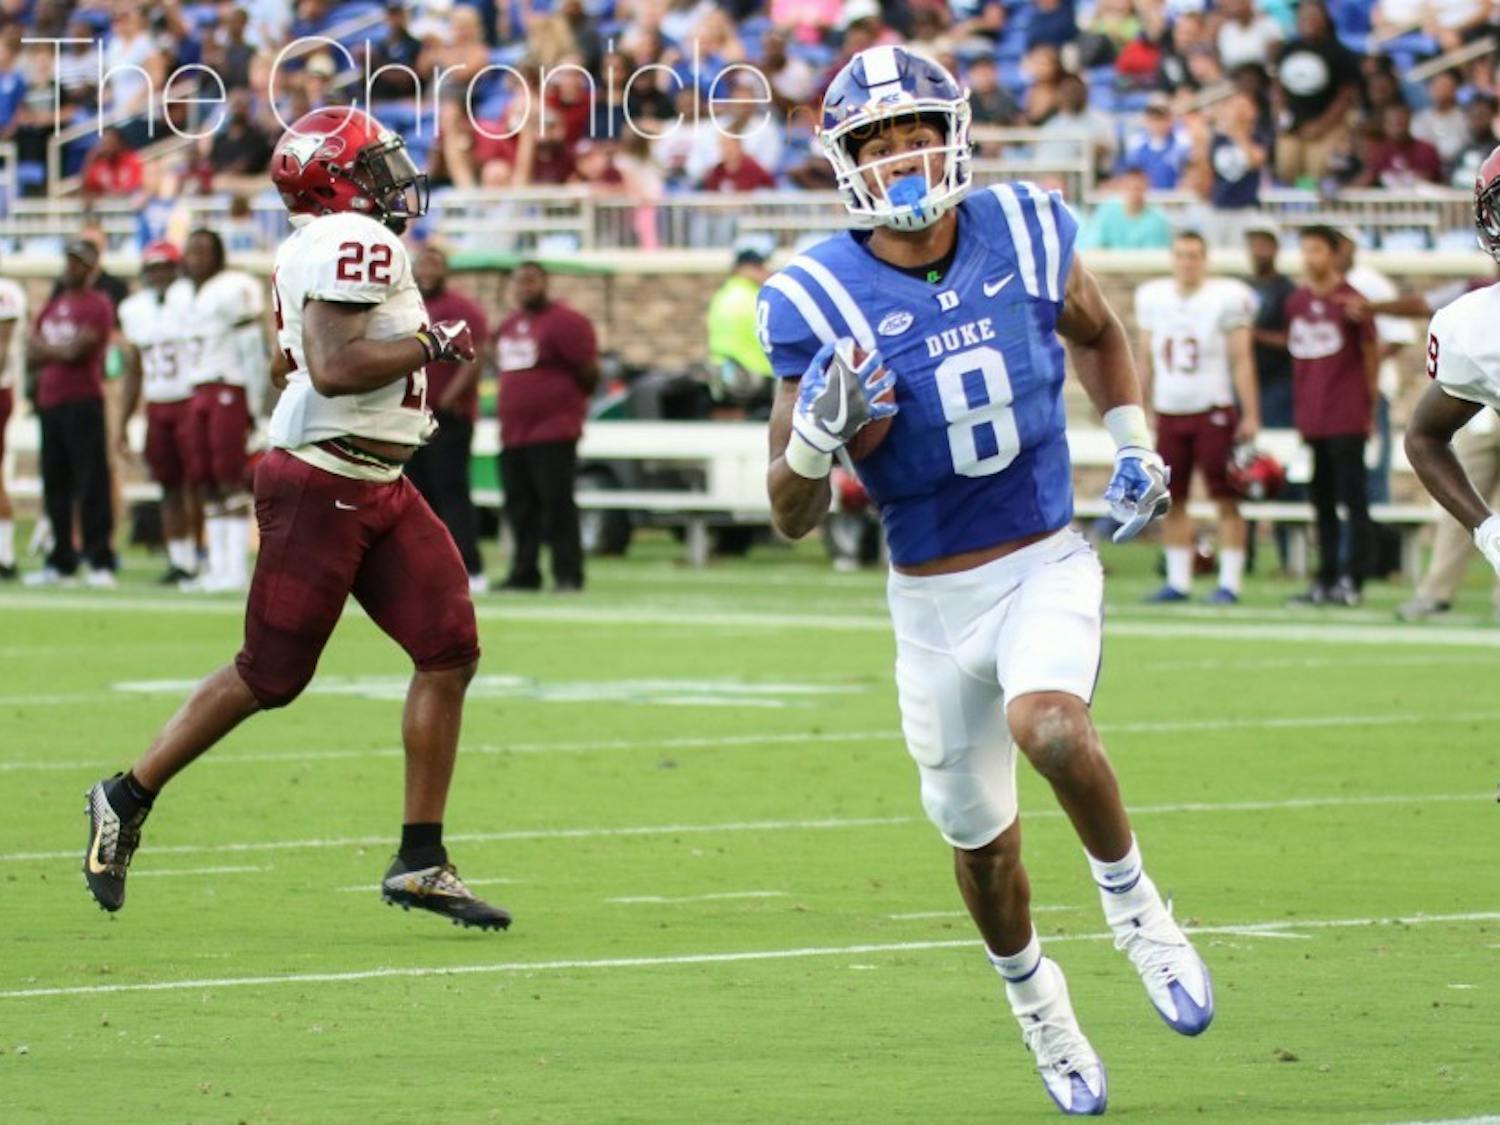 Aaron Young, who finished 2018 with seven receptions in two games played, will serve as Duke's most seasoned wide receiver to start the season